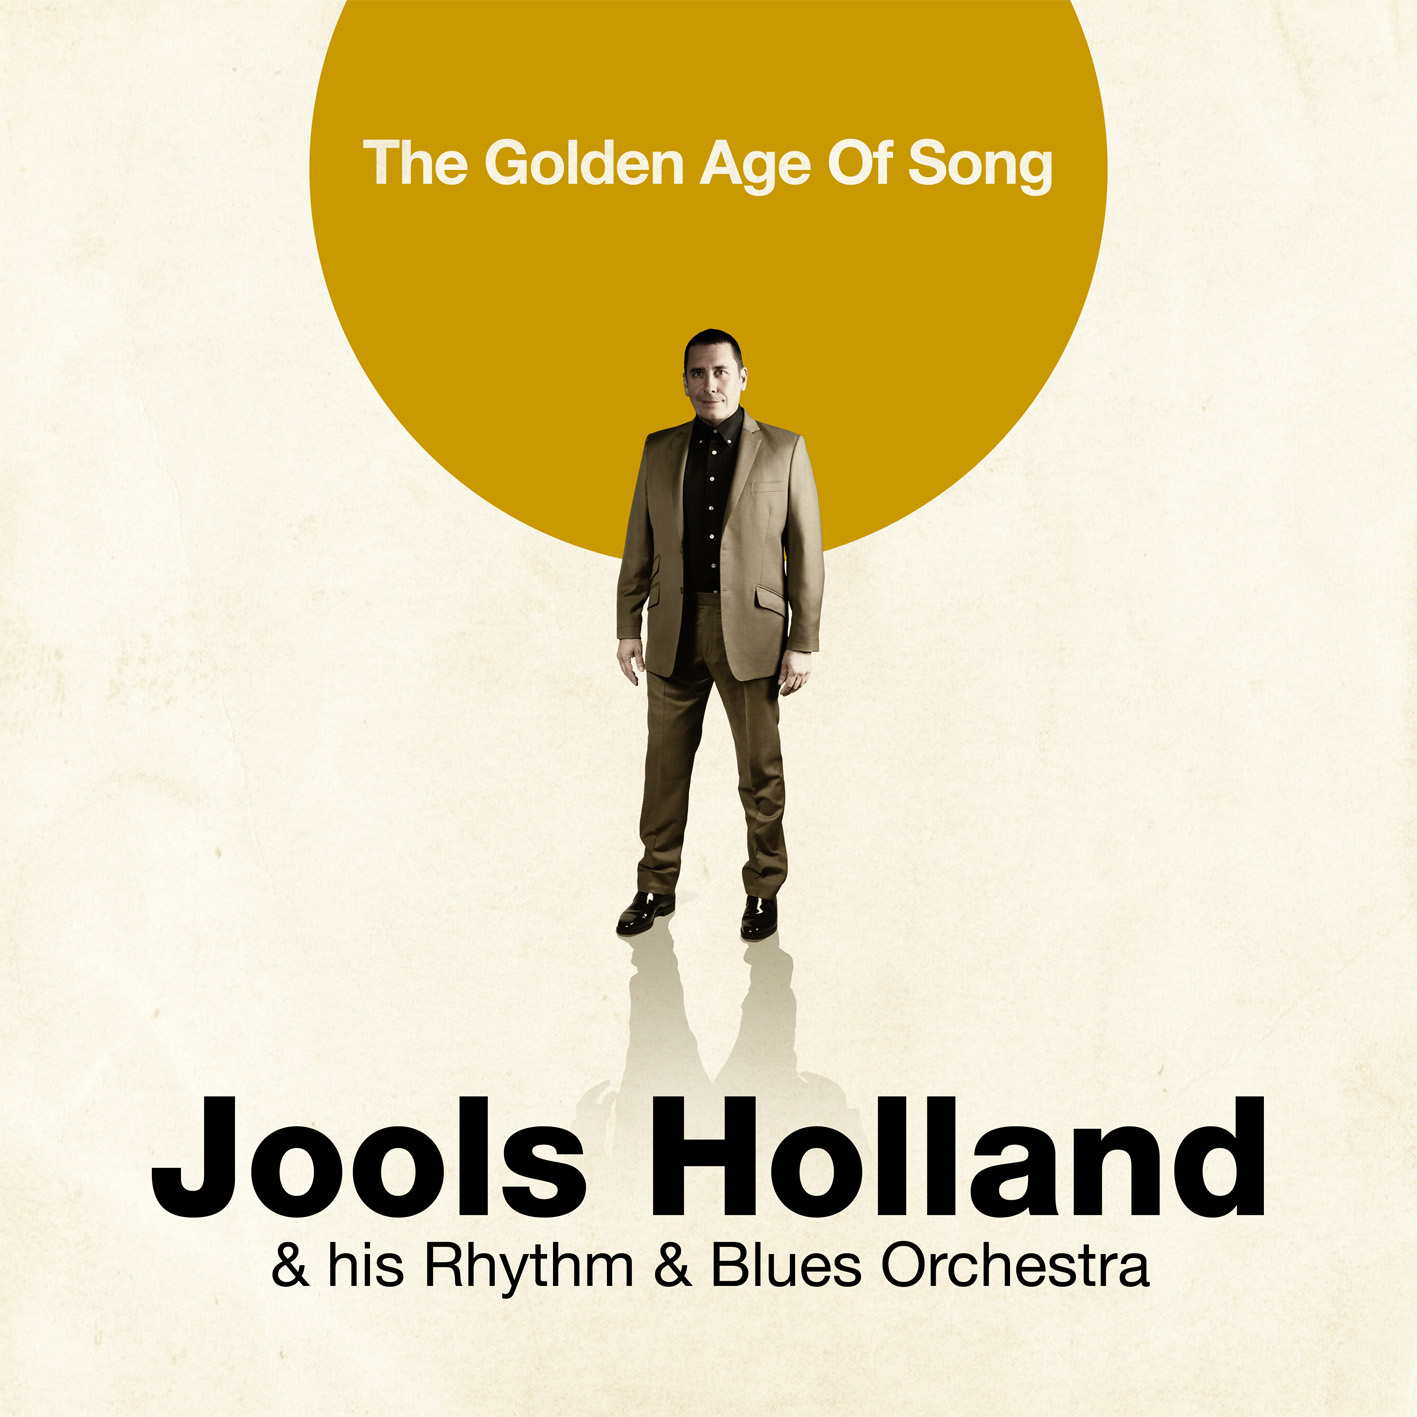 WIN: Jools Holland Golden Age Of Song Album